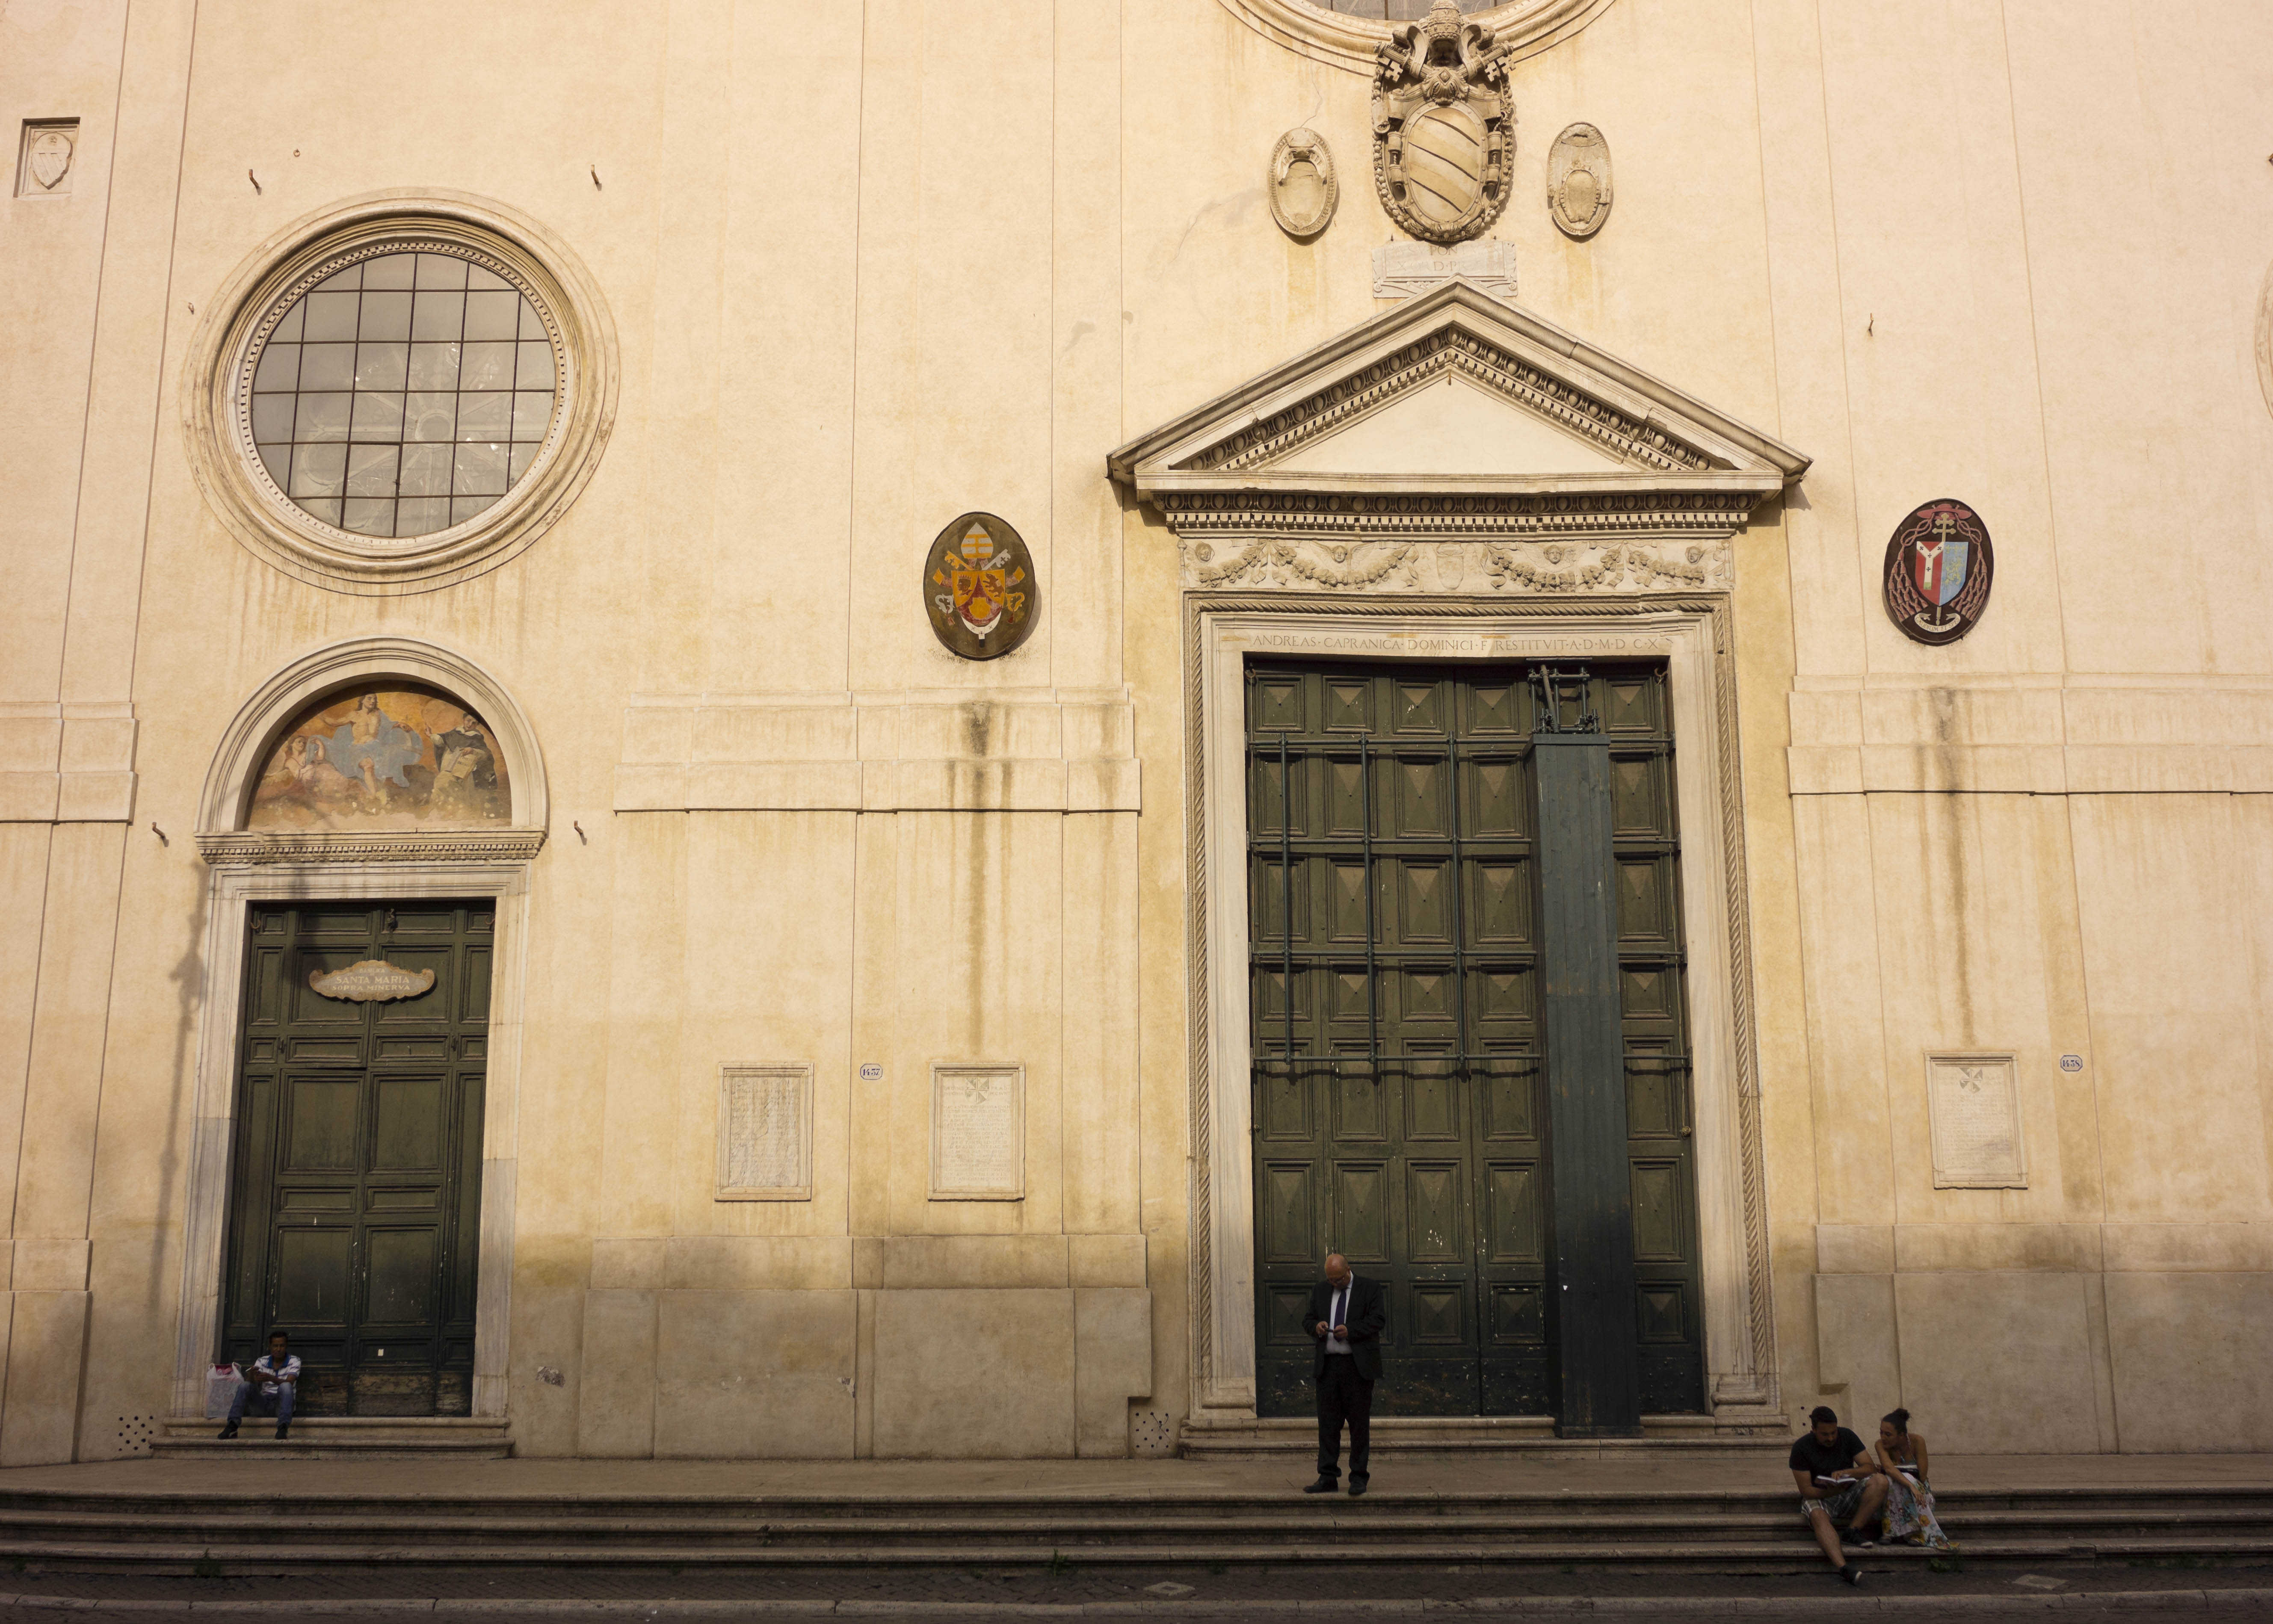 People take a break at dusk in front of  St. Mary over Minerva's Basilica (1566) in Rome, Thursday, June 27, 2013. ( AP Photo/Domenico Stinellis)